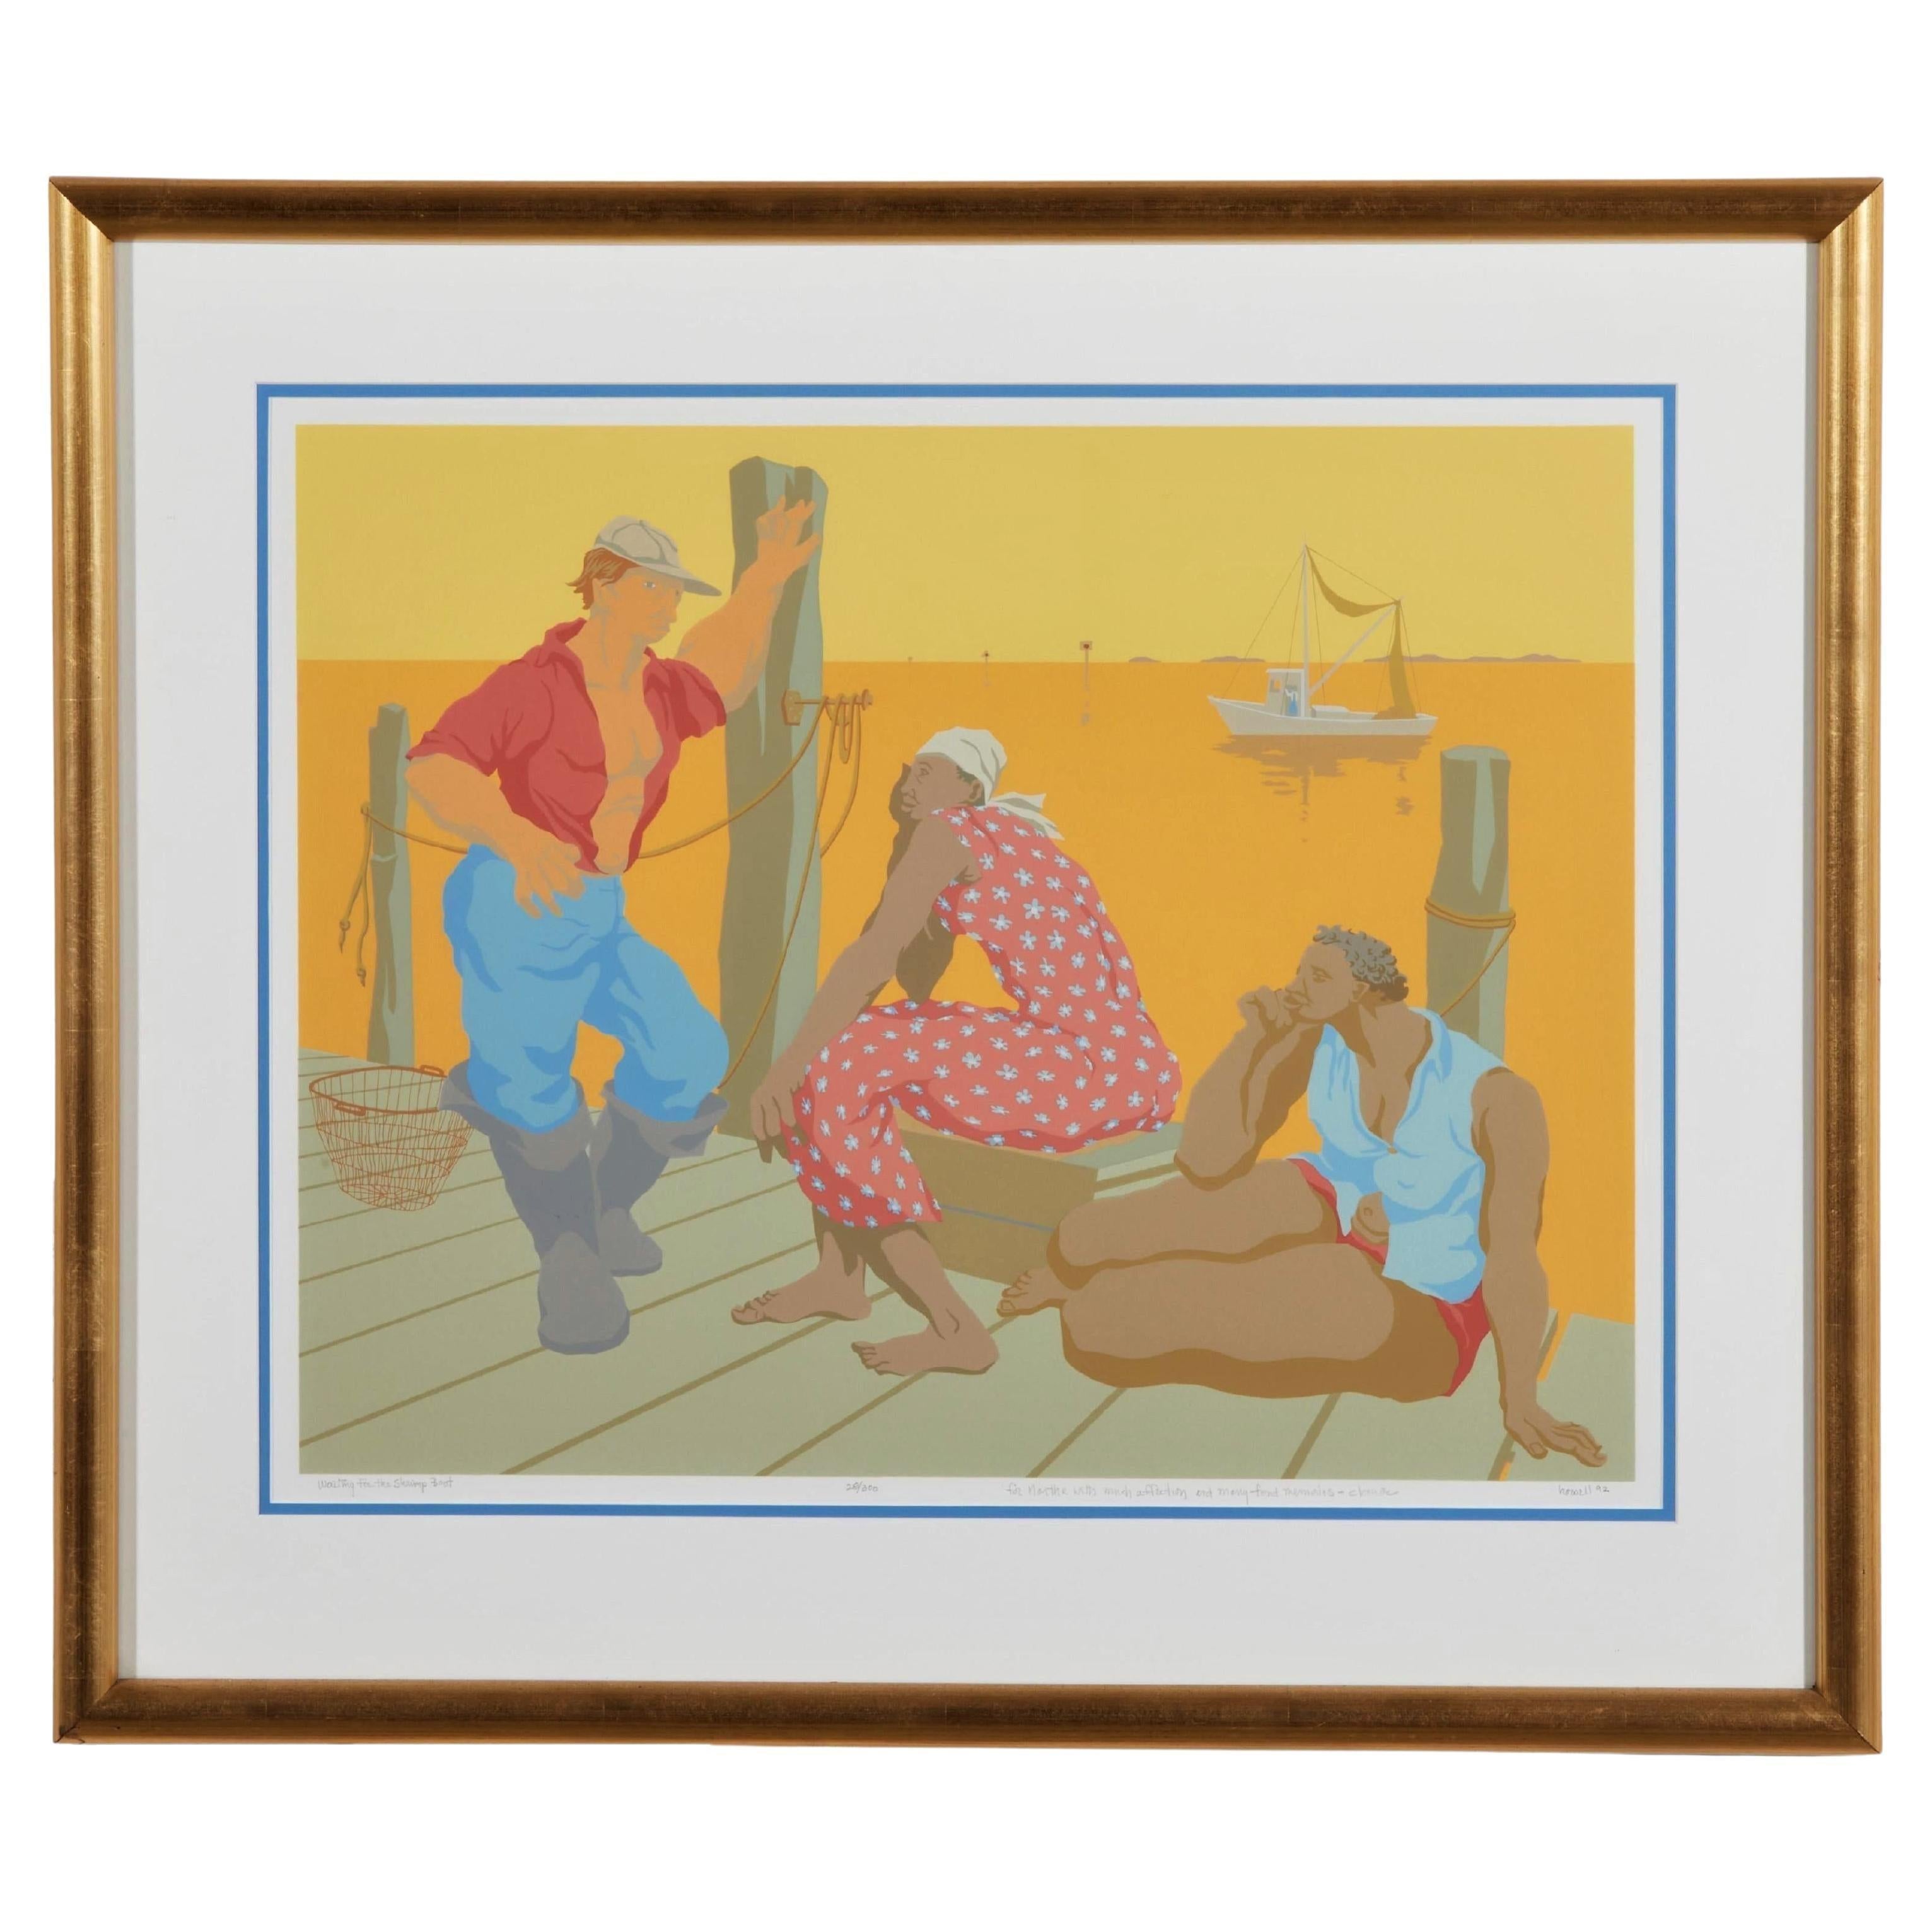 Colorful Contemporary Modern decorative wall Art print framed American beach NC . As part North Carolina Fisherman Waiting for the Shrimp Boat . serigraph printed in beautiful colors. Matted and a simple gold color frame. Claude Howell is often